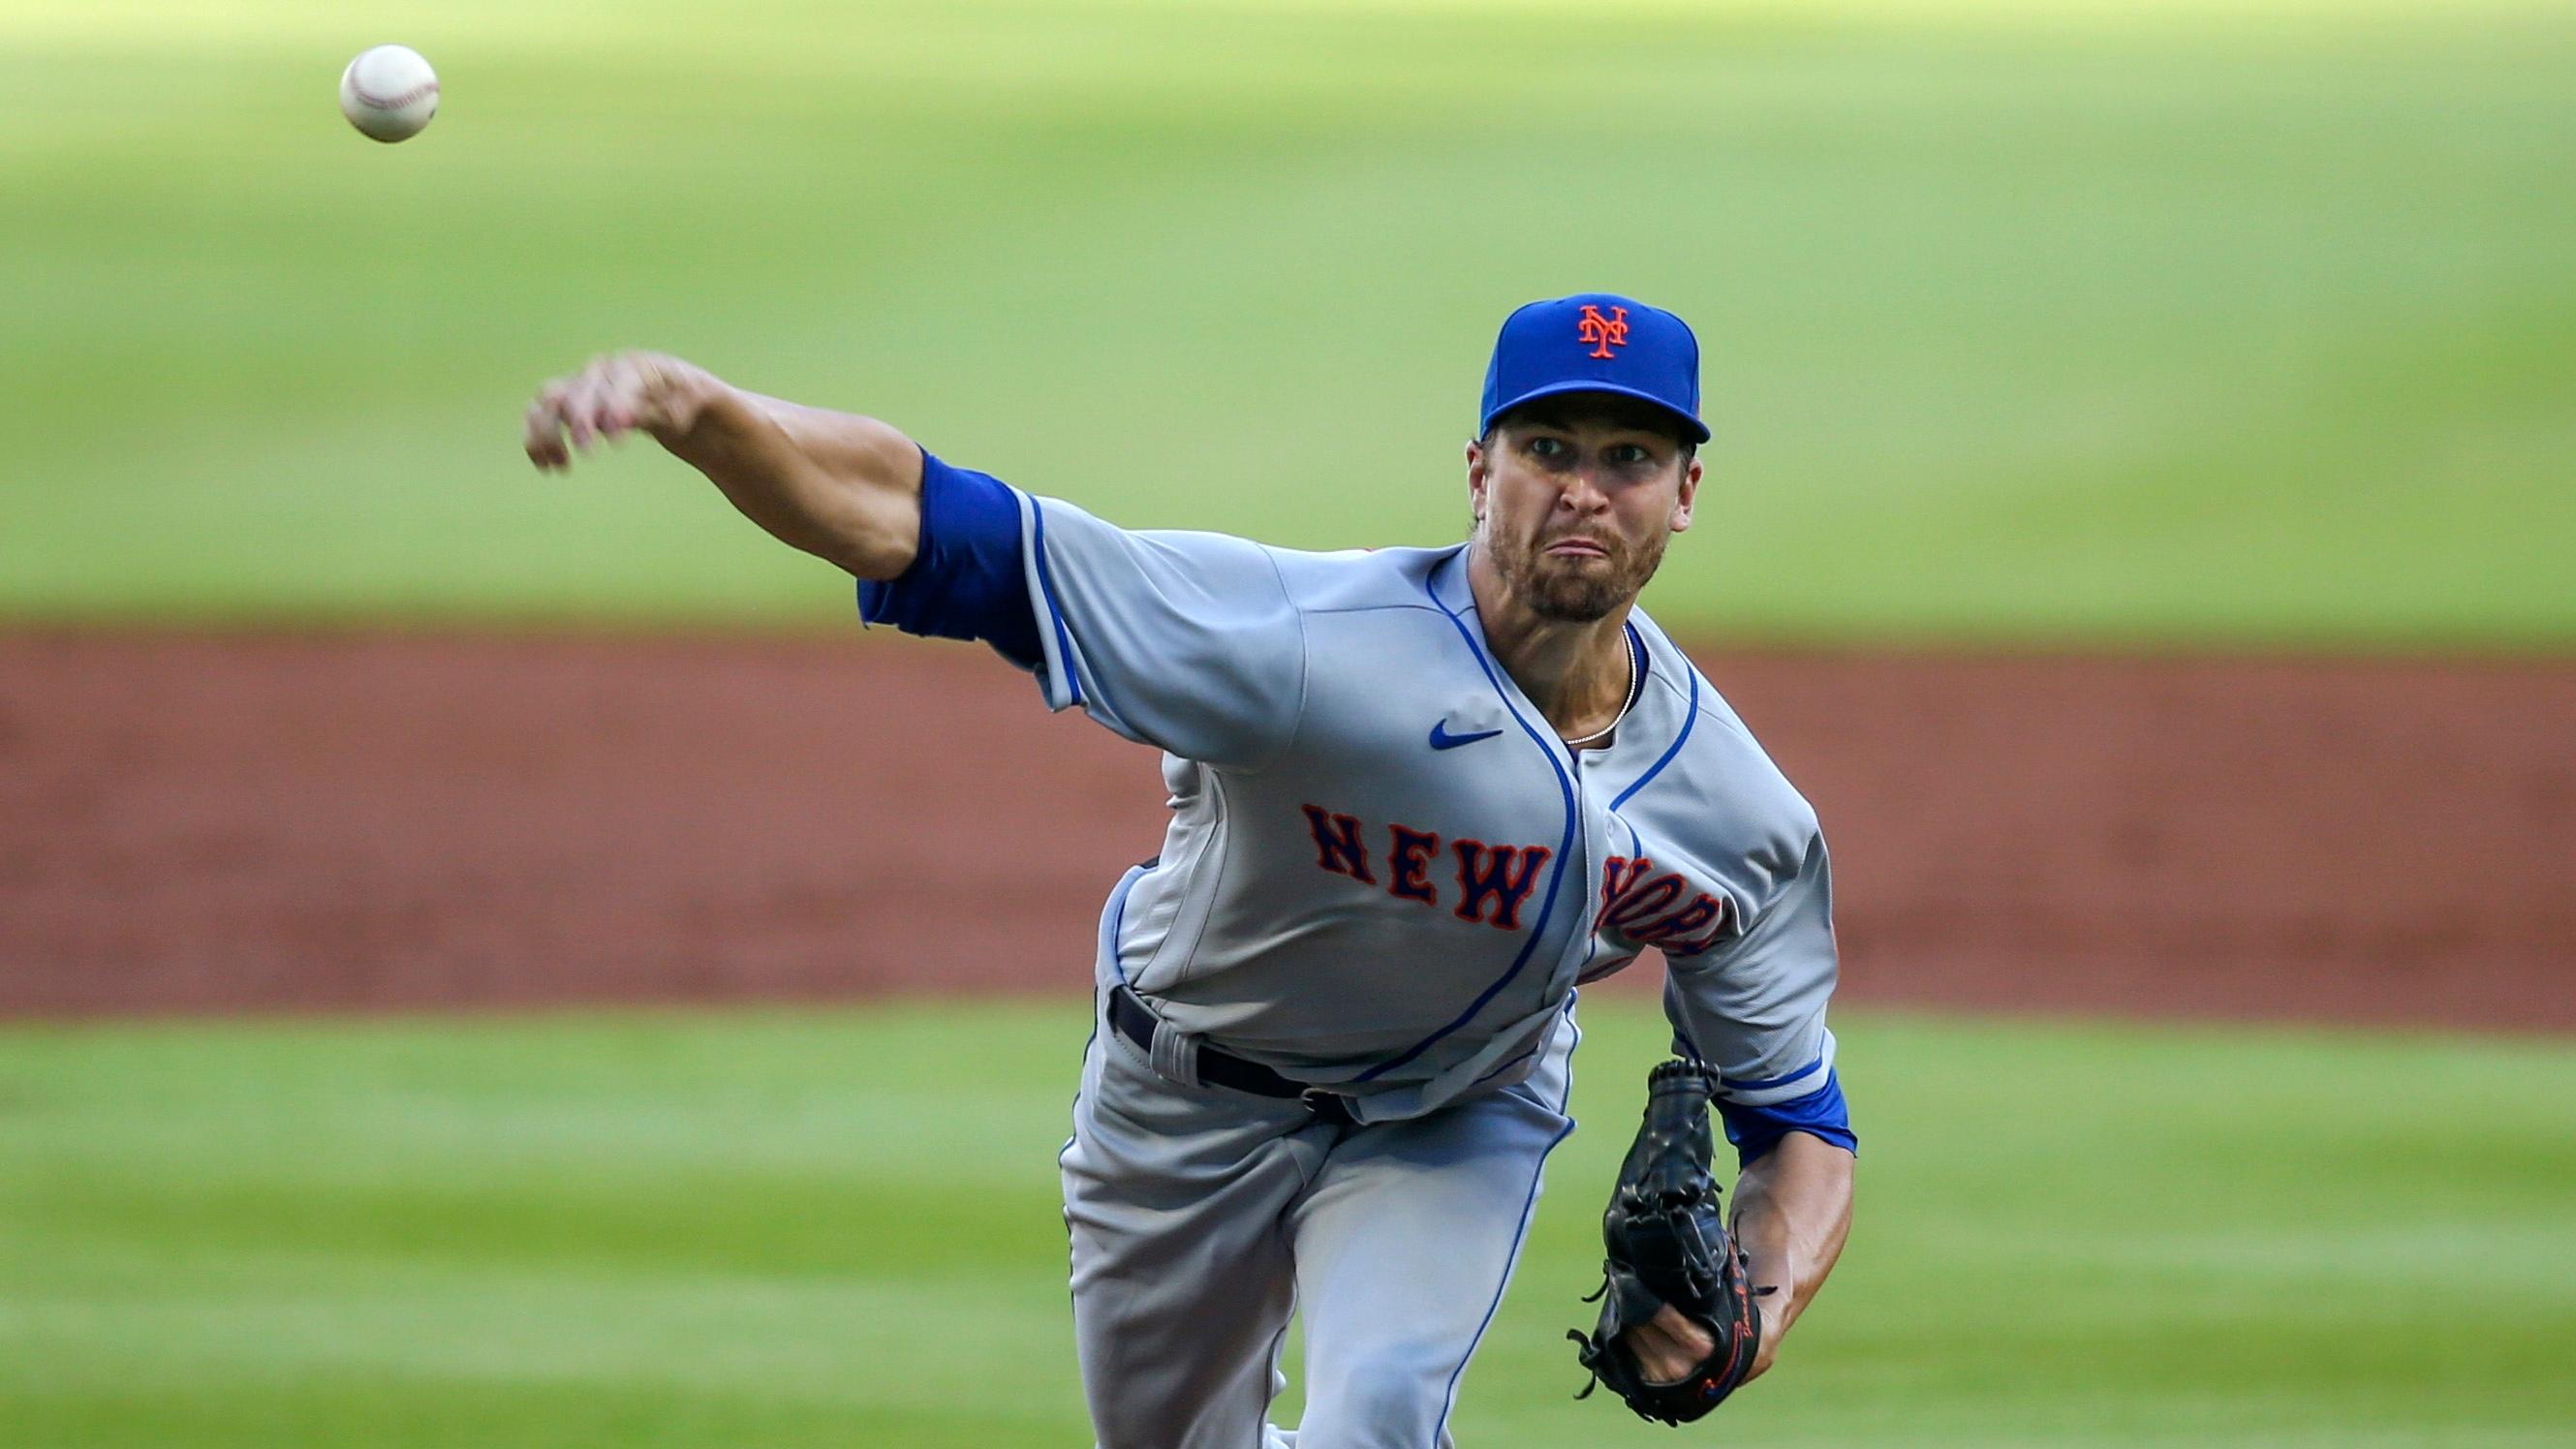 Aug 3, 2020; Atlanta, Georgia, USA; New York Mets starting pitcher Jacob deGrom (48) throws against the Atlanta Braves in the first inning at Truist Park. / Brett Davis-USA TODAY Sports